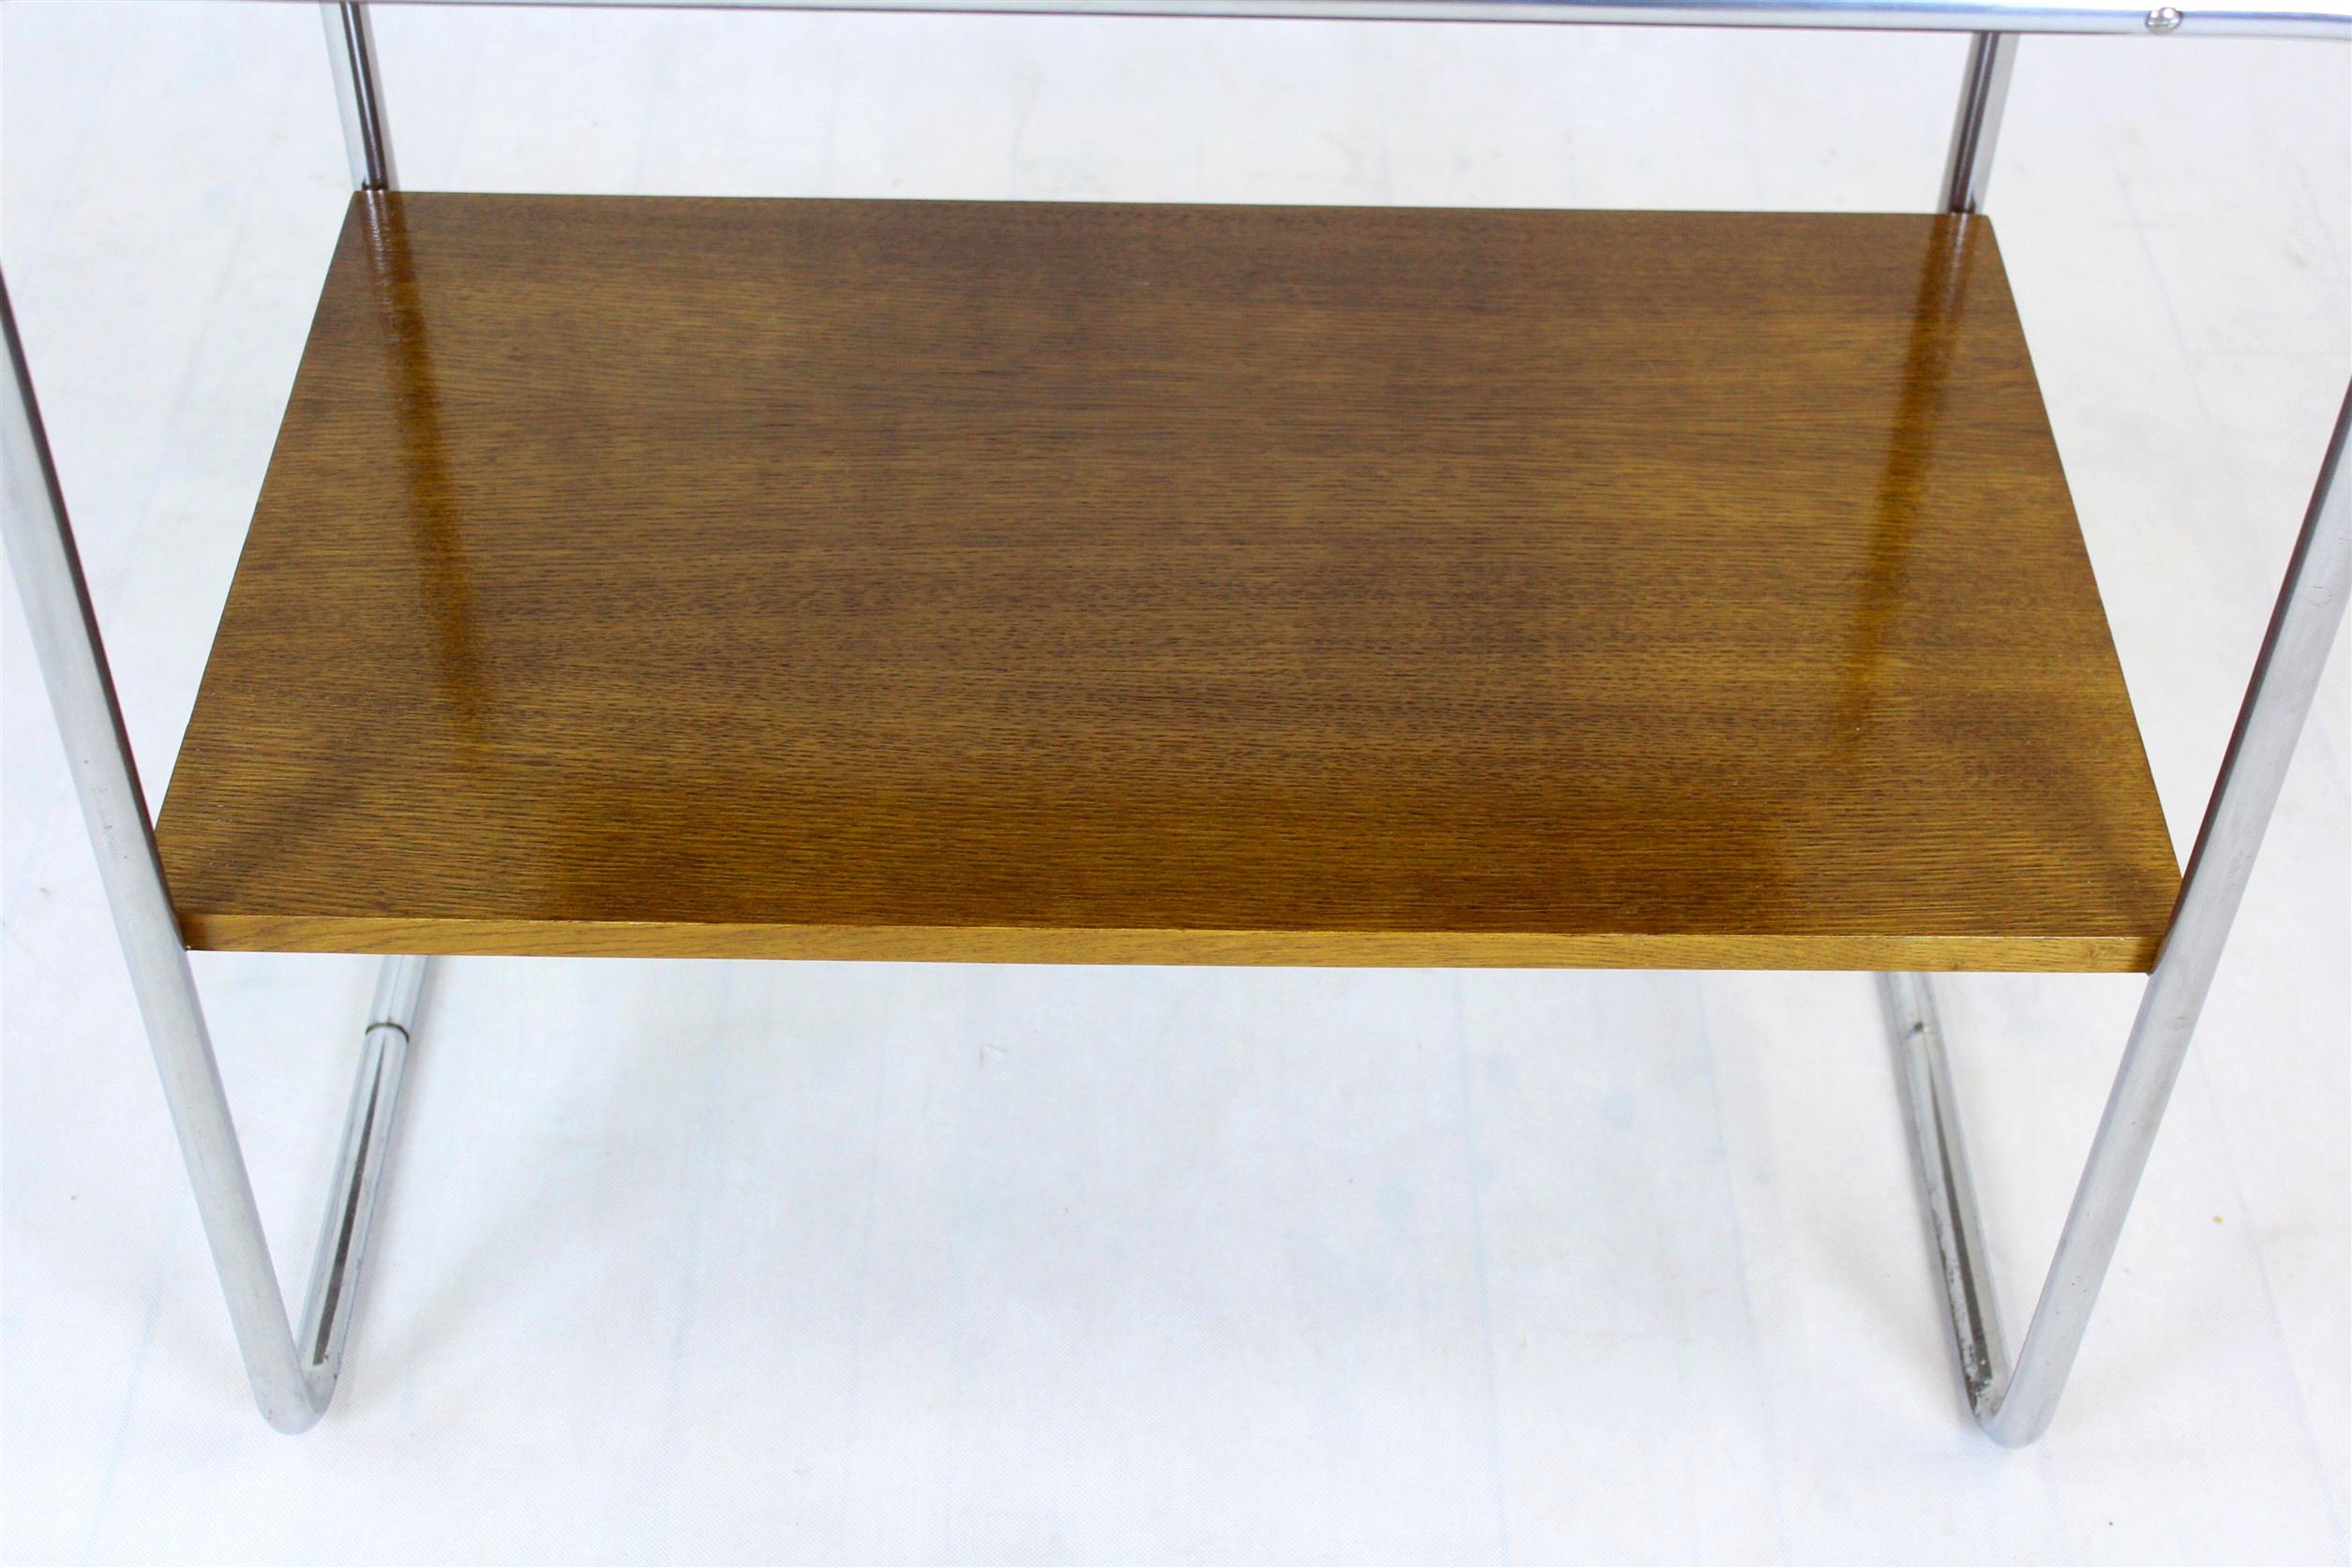 Czech Refinished B12 Side Table by Marcel Breuer, 1940s For Sale